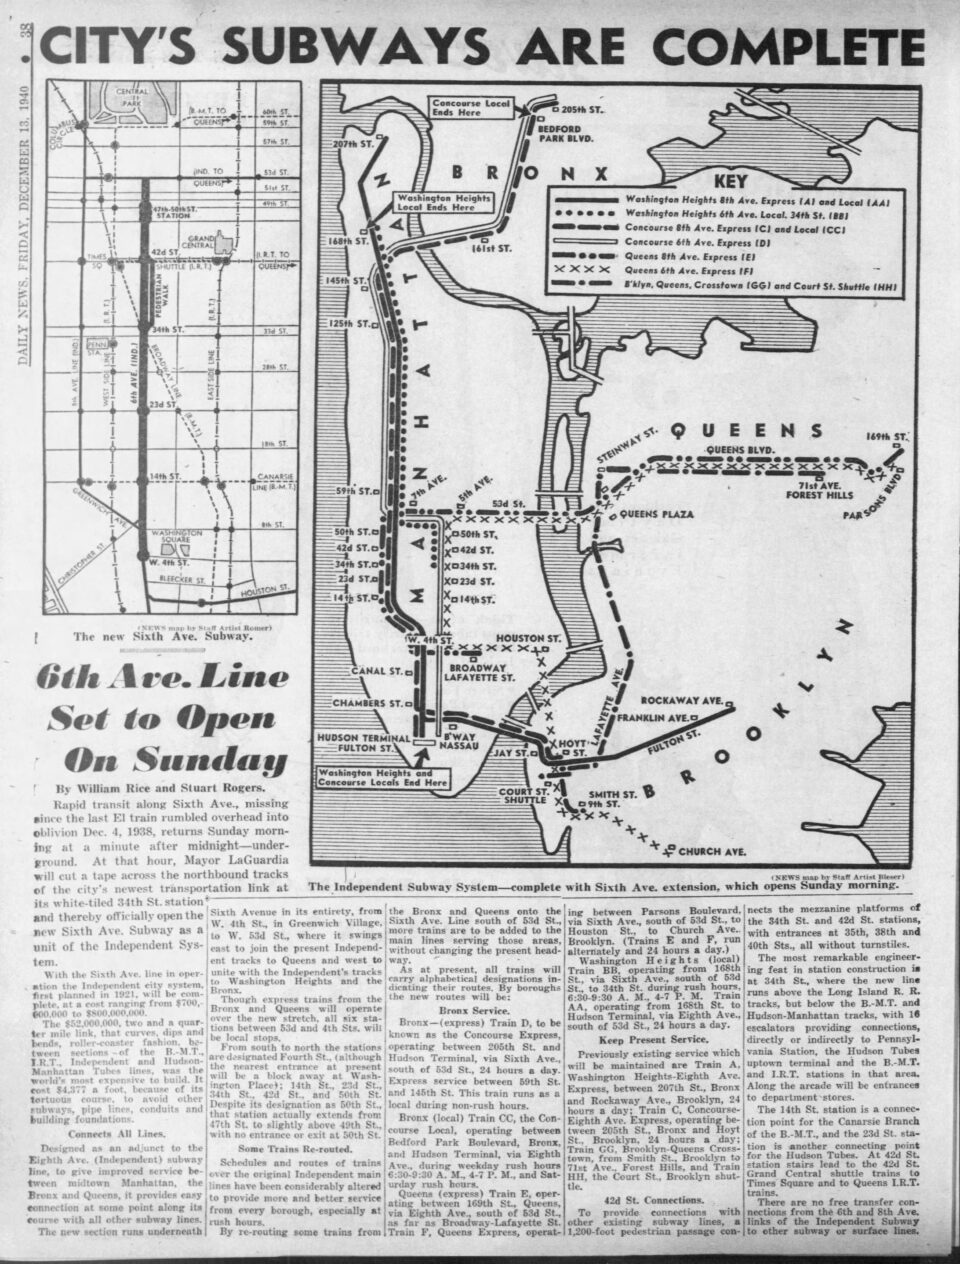 "6th Ave Line Set to Open on Sunday" NY Daily News, December 13th, 1940.